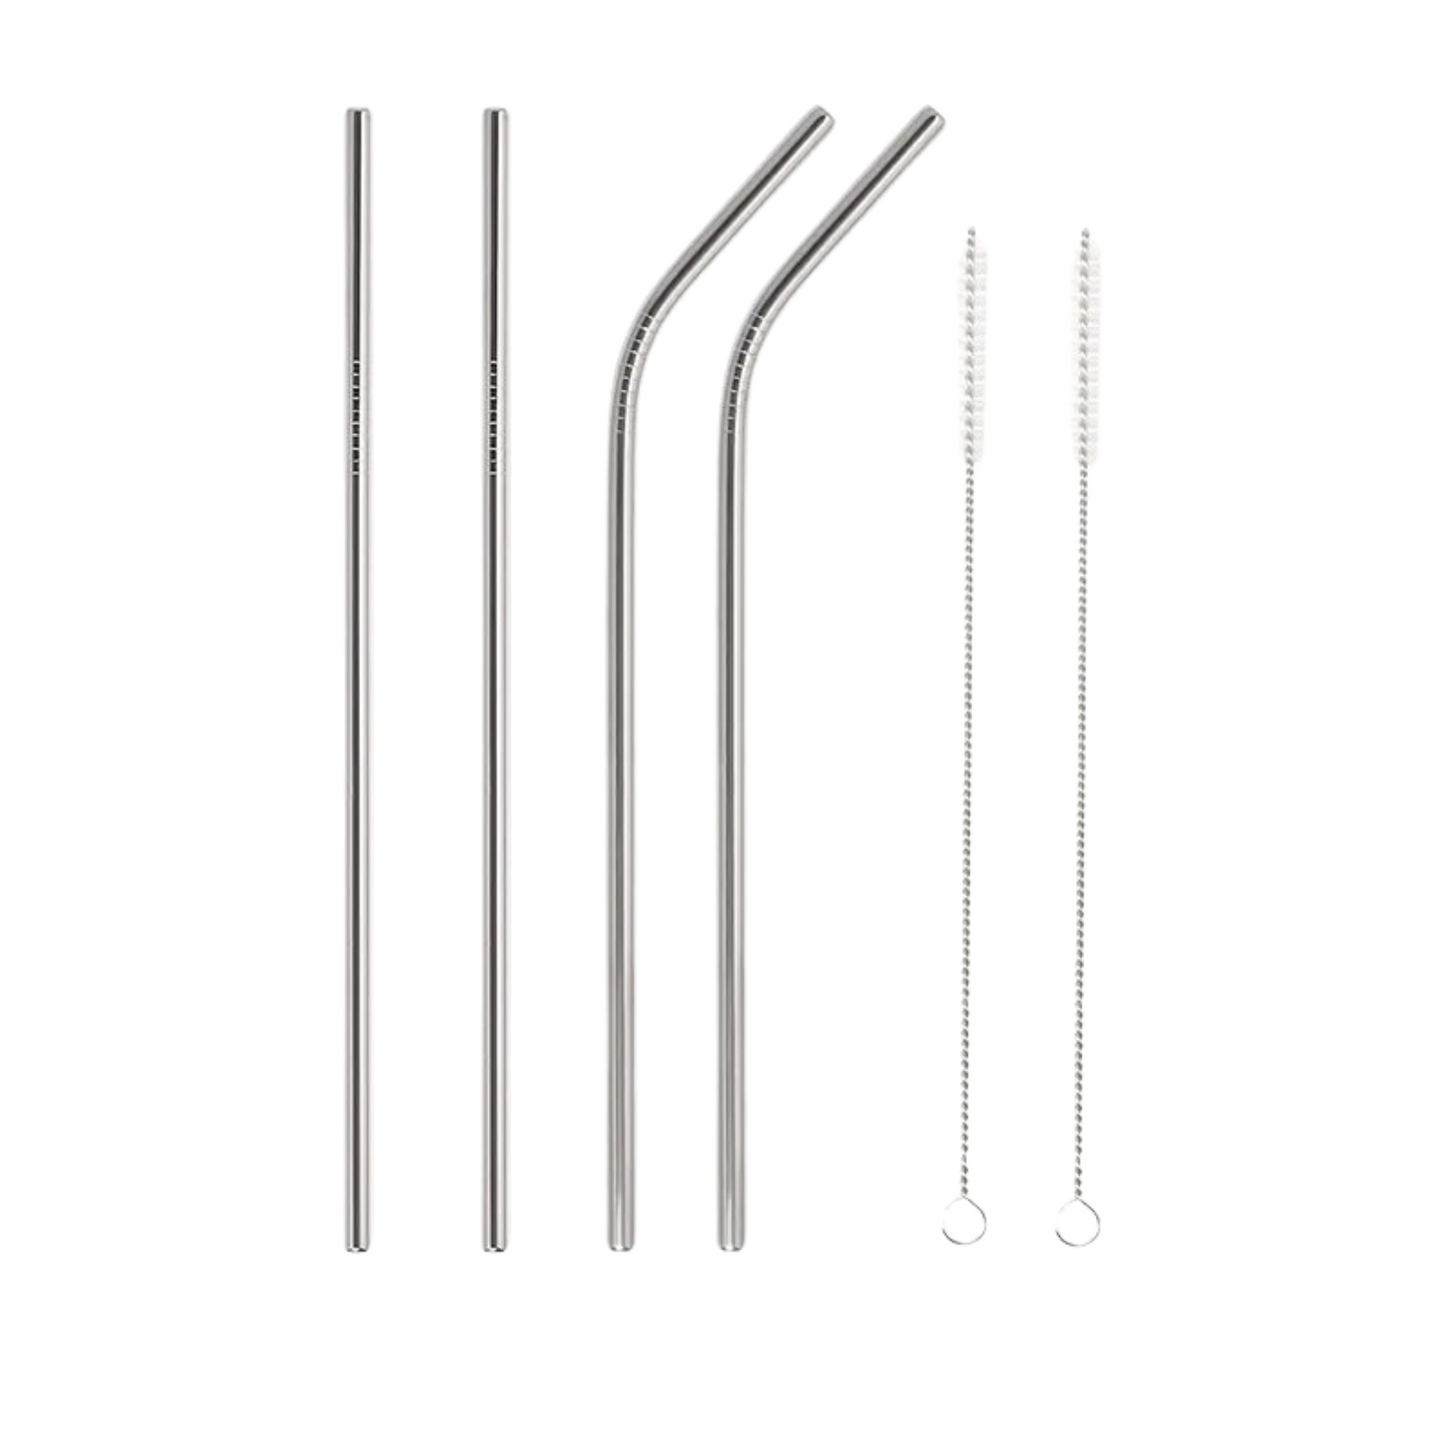 4 silver Stainless Steel Reusable Straws with  cleaning brushes 